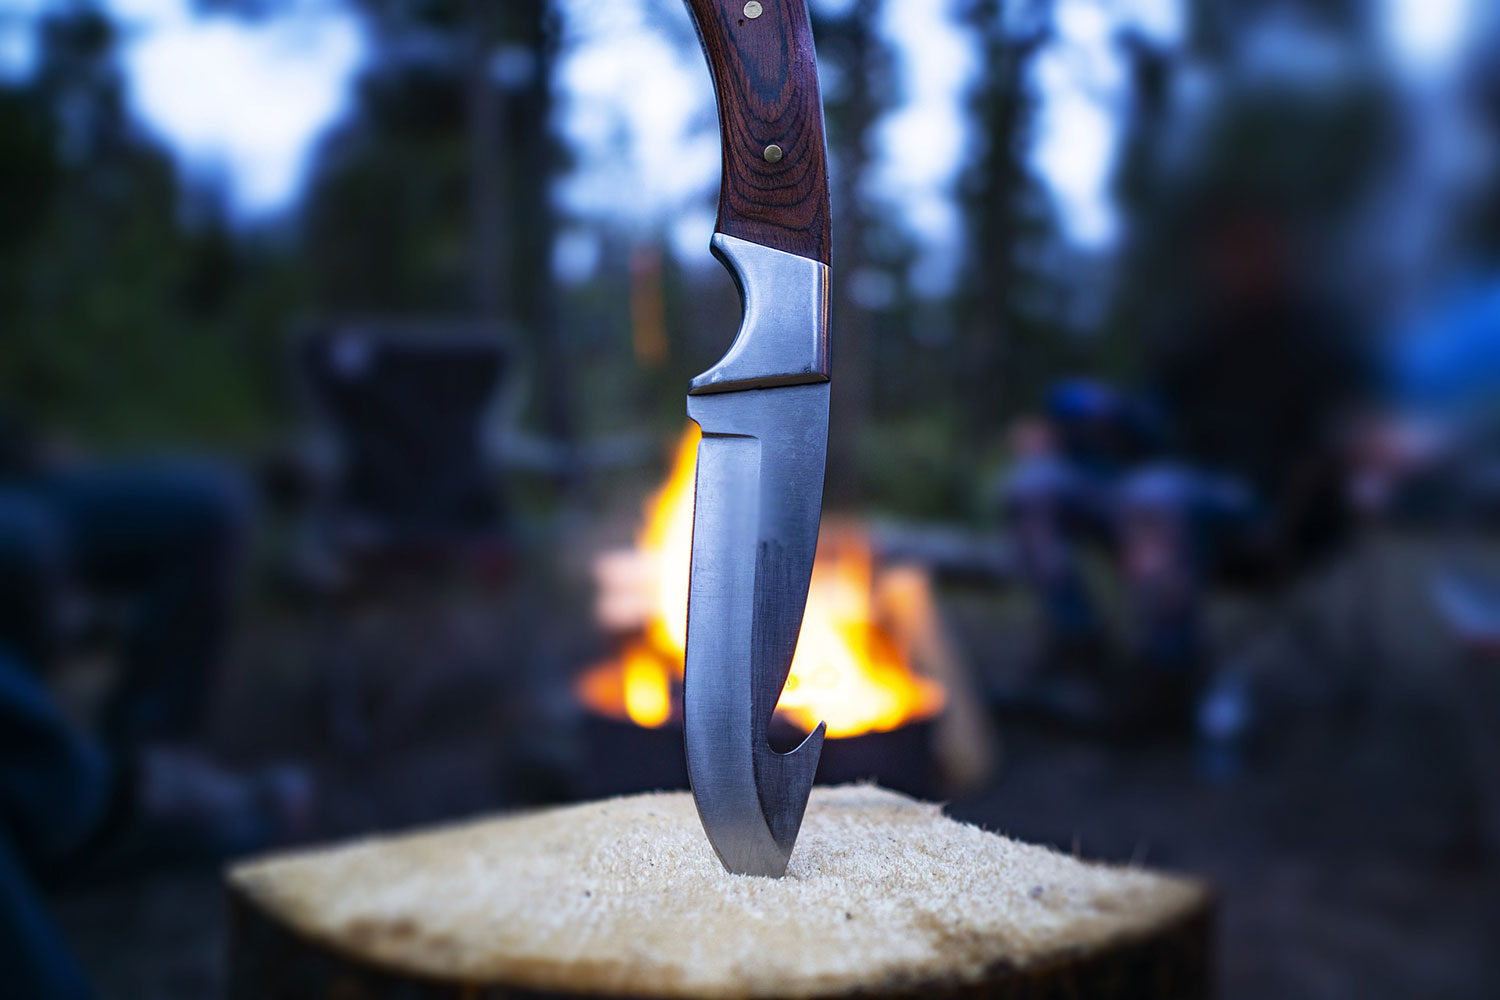 https://www.themanual.com/wp-content/uploads/sites/9/2021/12/best-hunting-knives.jpg?p=1